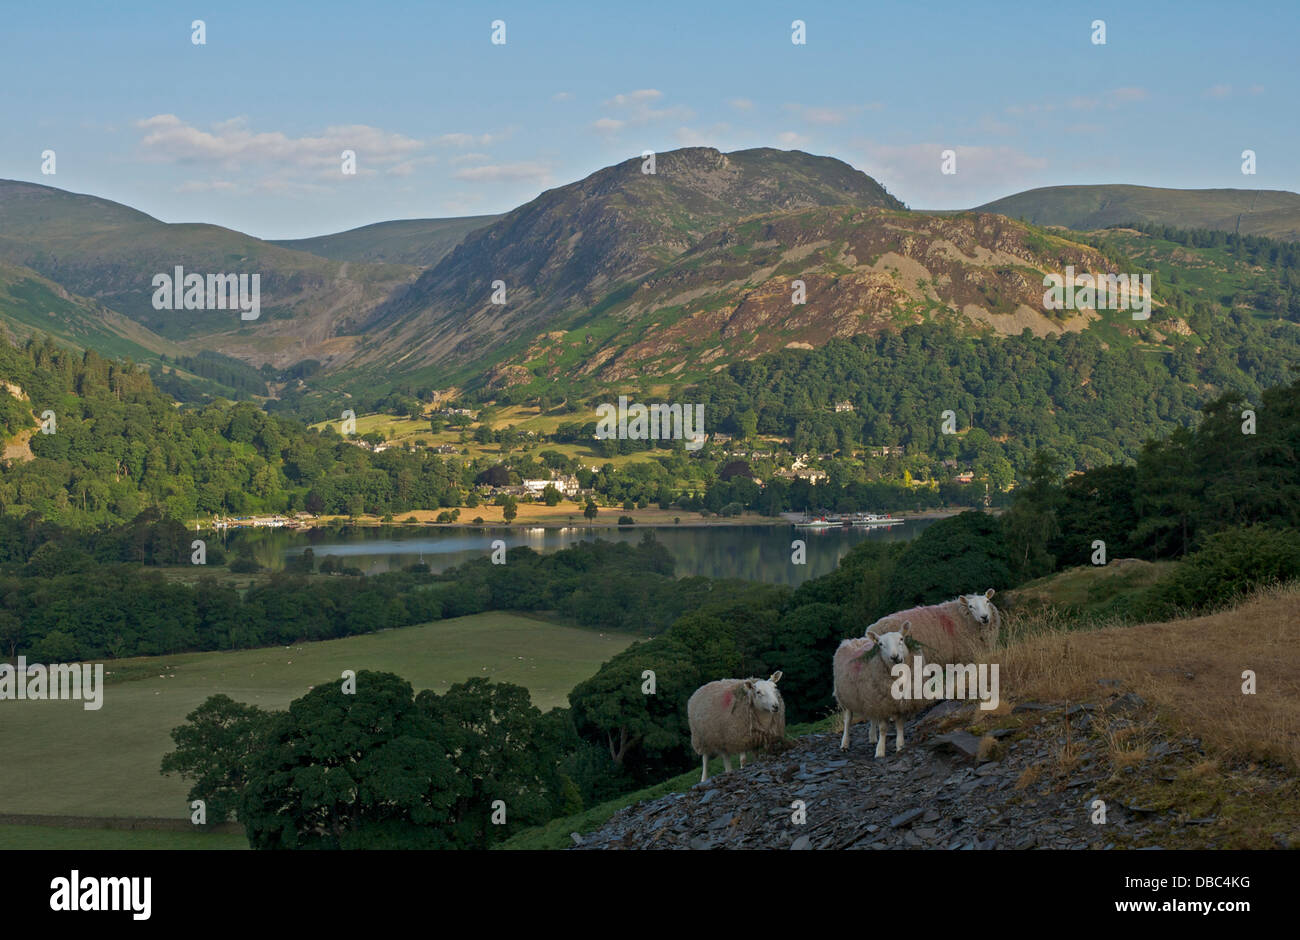 Three sheep on hillside, overlooking Ullswater and the village of Glenridding, Lake District National Park, Cumbria, England UK Stock Photo